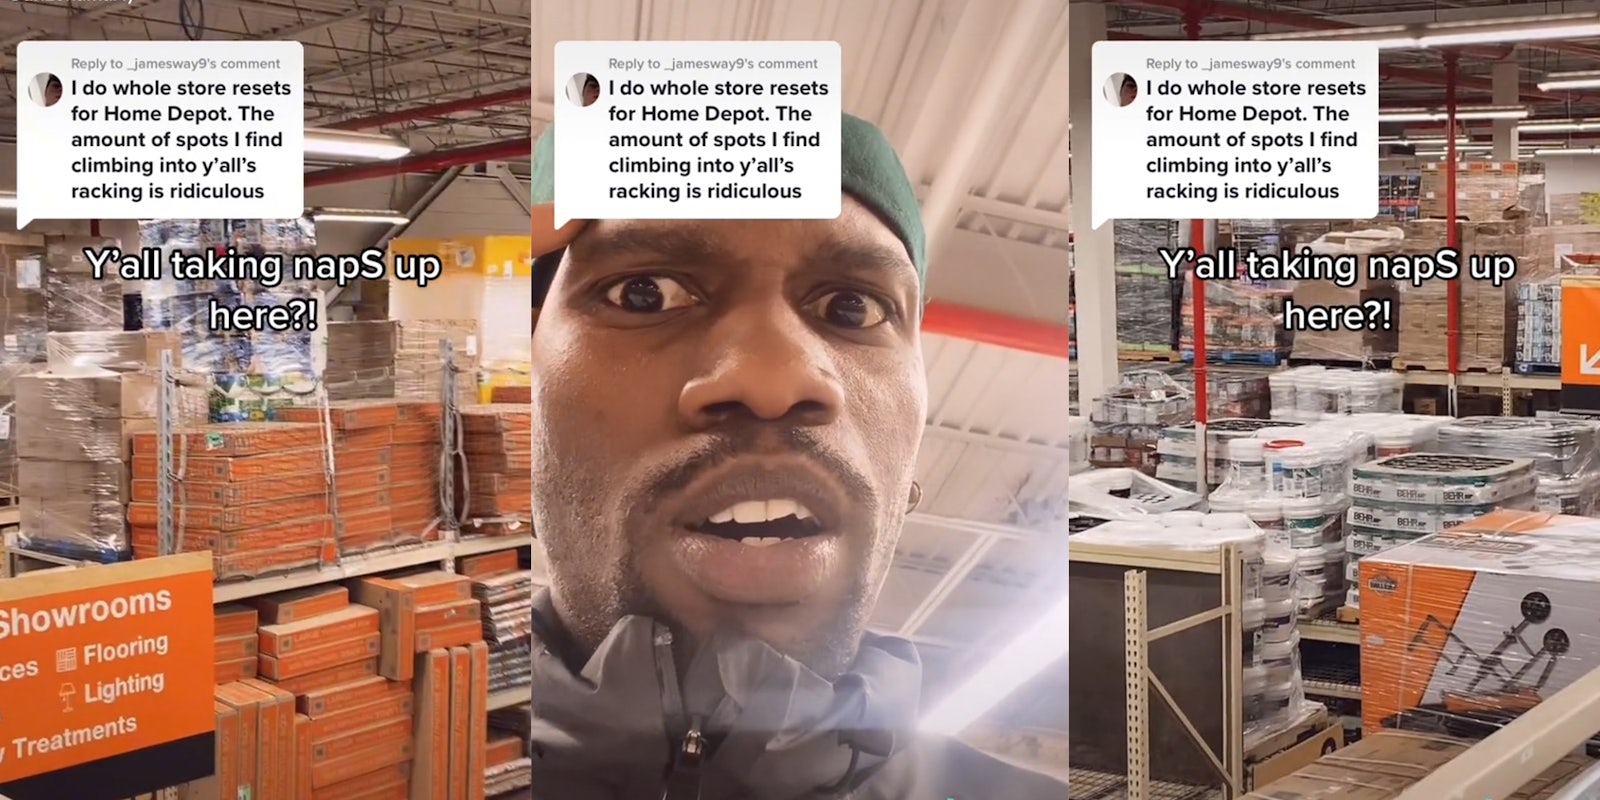 home depot racking (l&r) shocked man (c) all with caption 'I do whole store resets for Home Depot. The amount of spots I find climbing into y'alls racking is ridiculous'